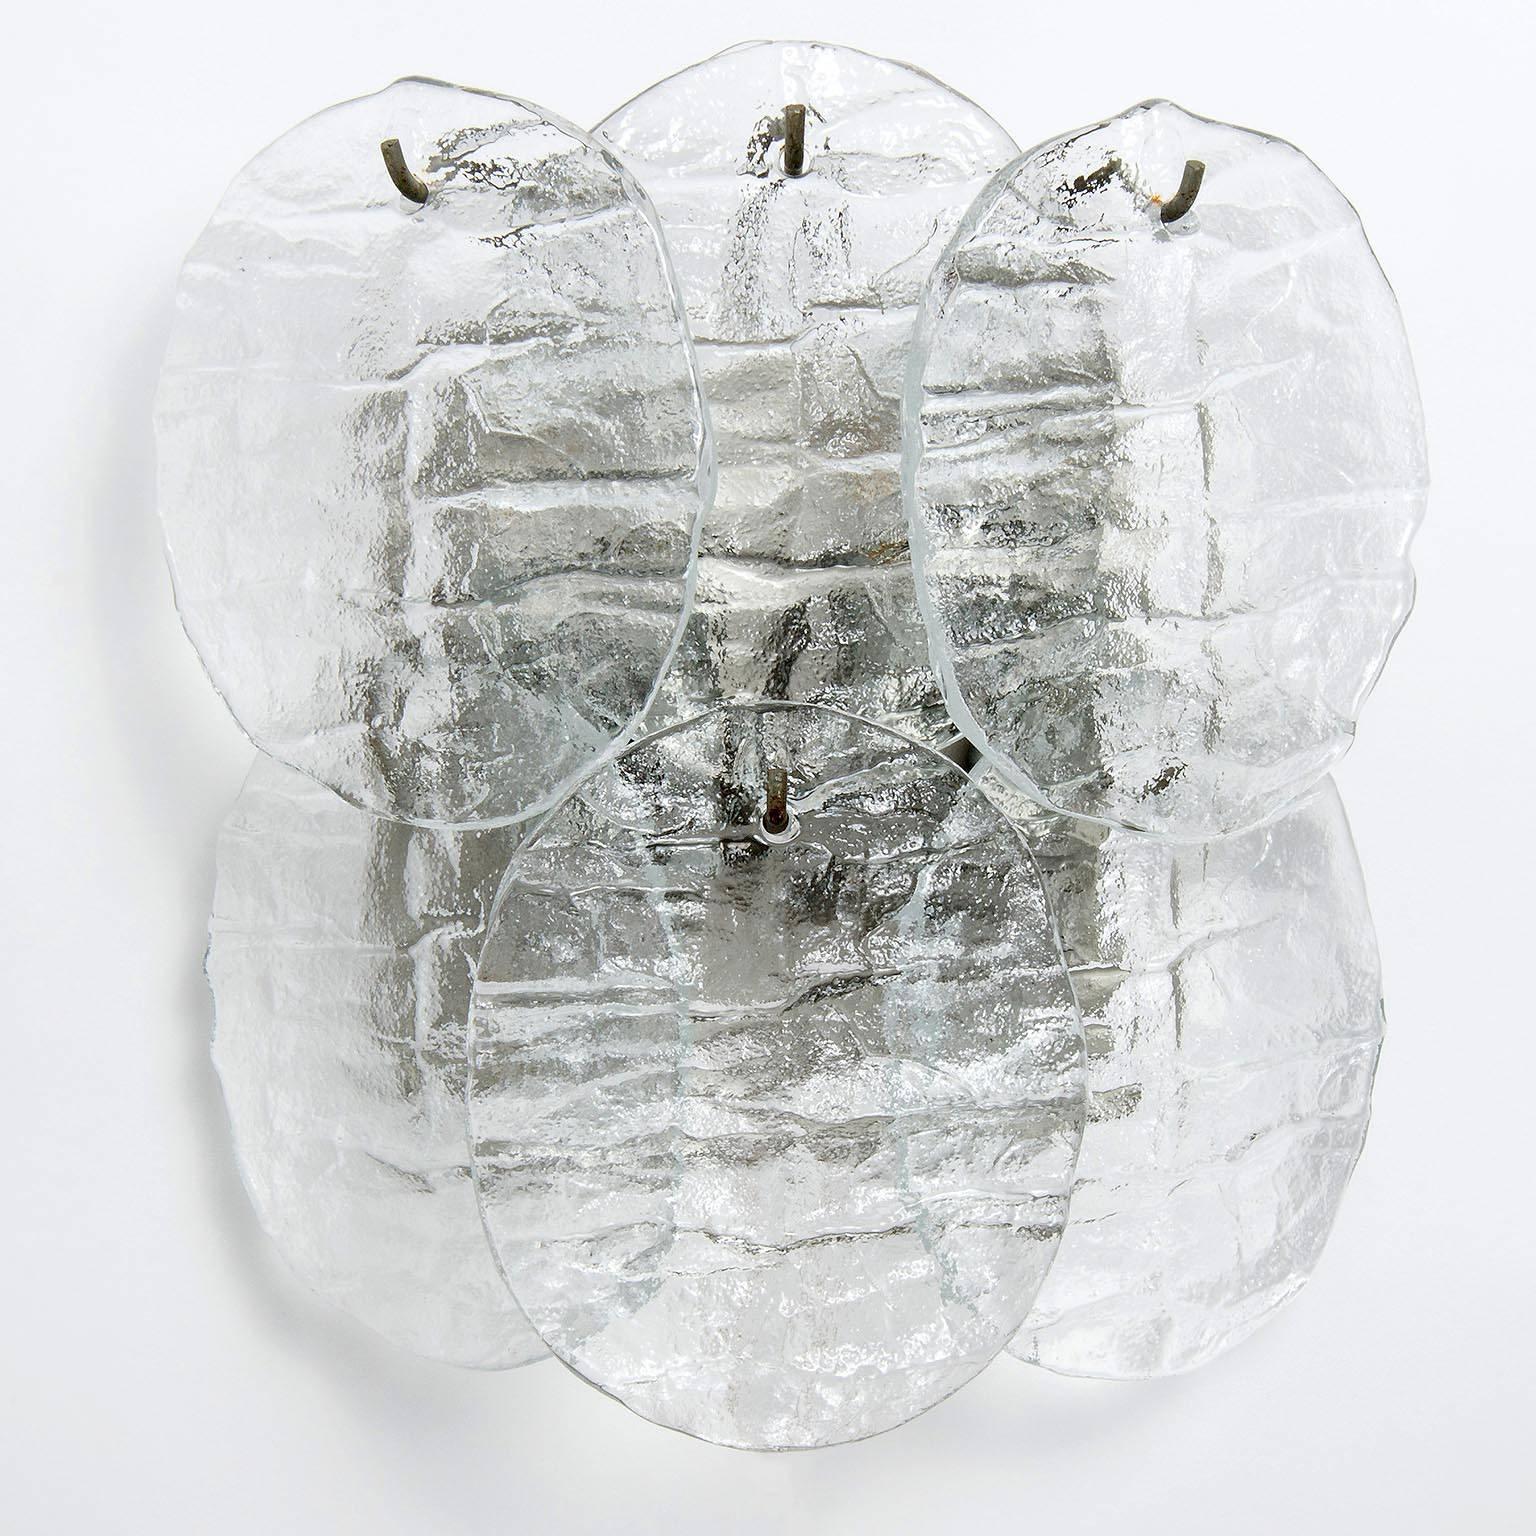 A set of two large light wall lights model 'Blatt' (Blatt is the German word for leaf) by Kalmar, Austria, manufactured in Mid-Century, circa 1970 (late 1960s or early 1970s).
Six disc shaped clear glasses in the form of leaves hang with nickel